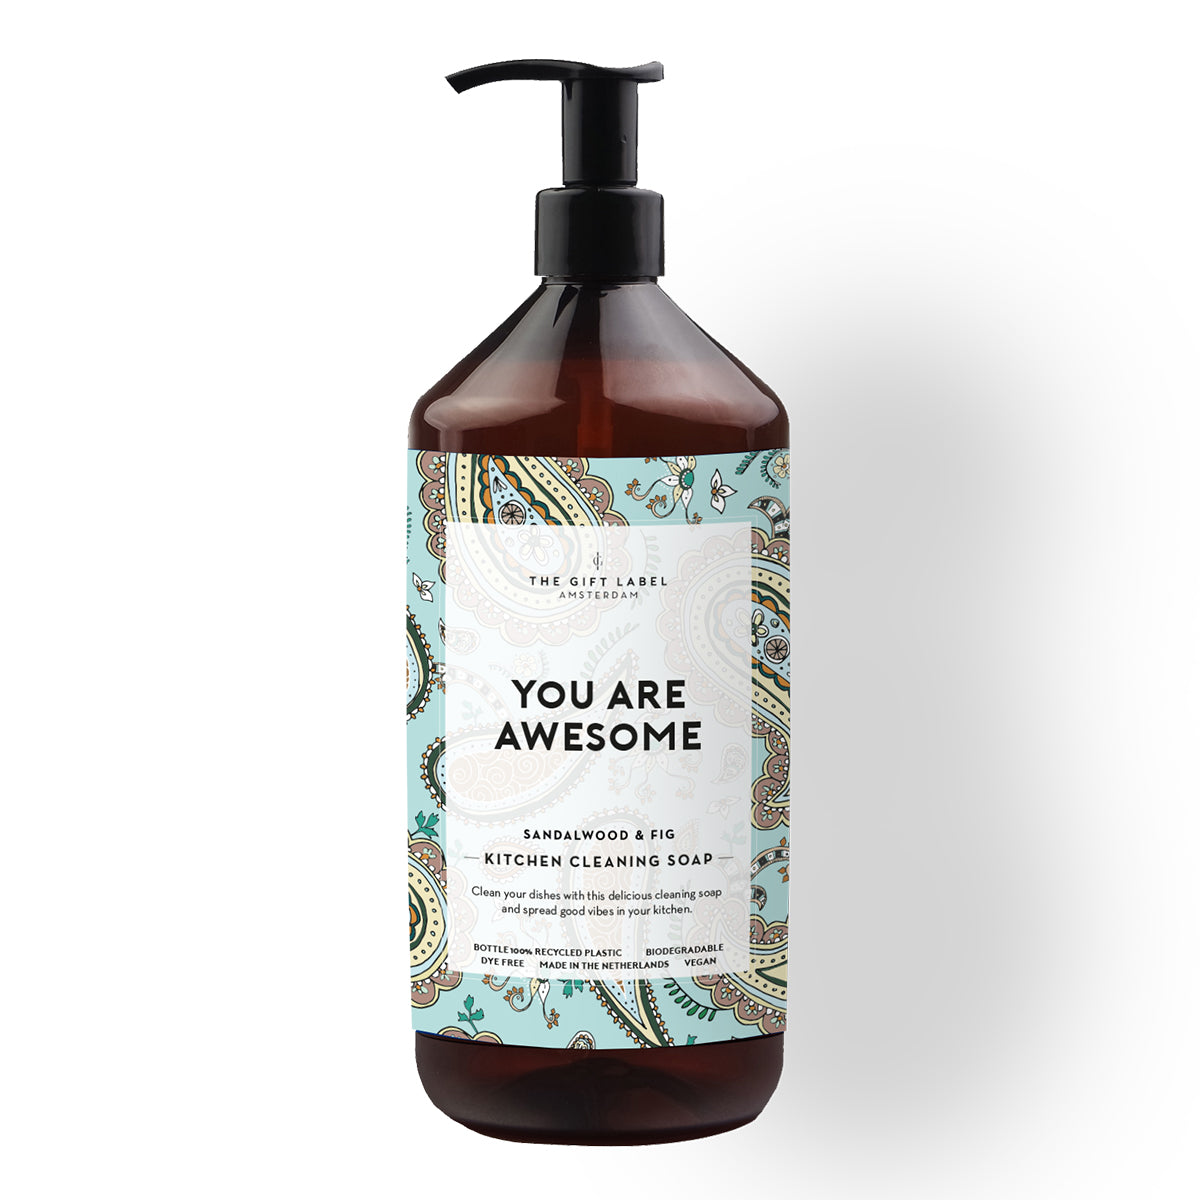 Kitchen Cleaning Soap 1000ml - You are awesome